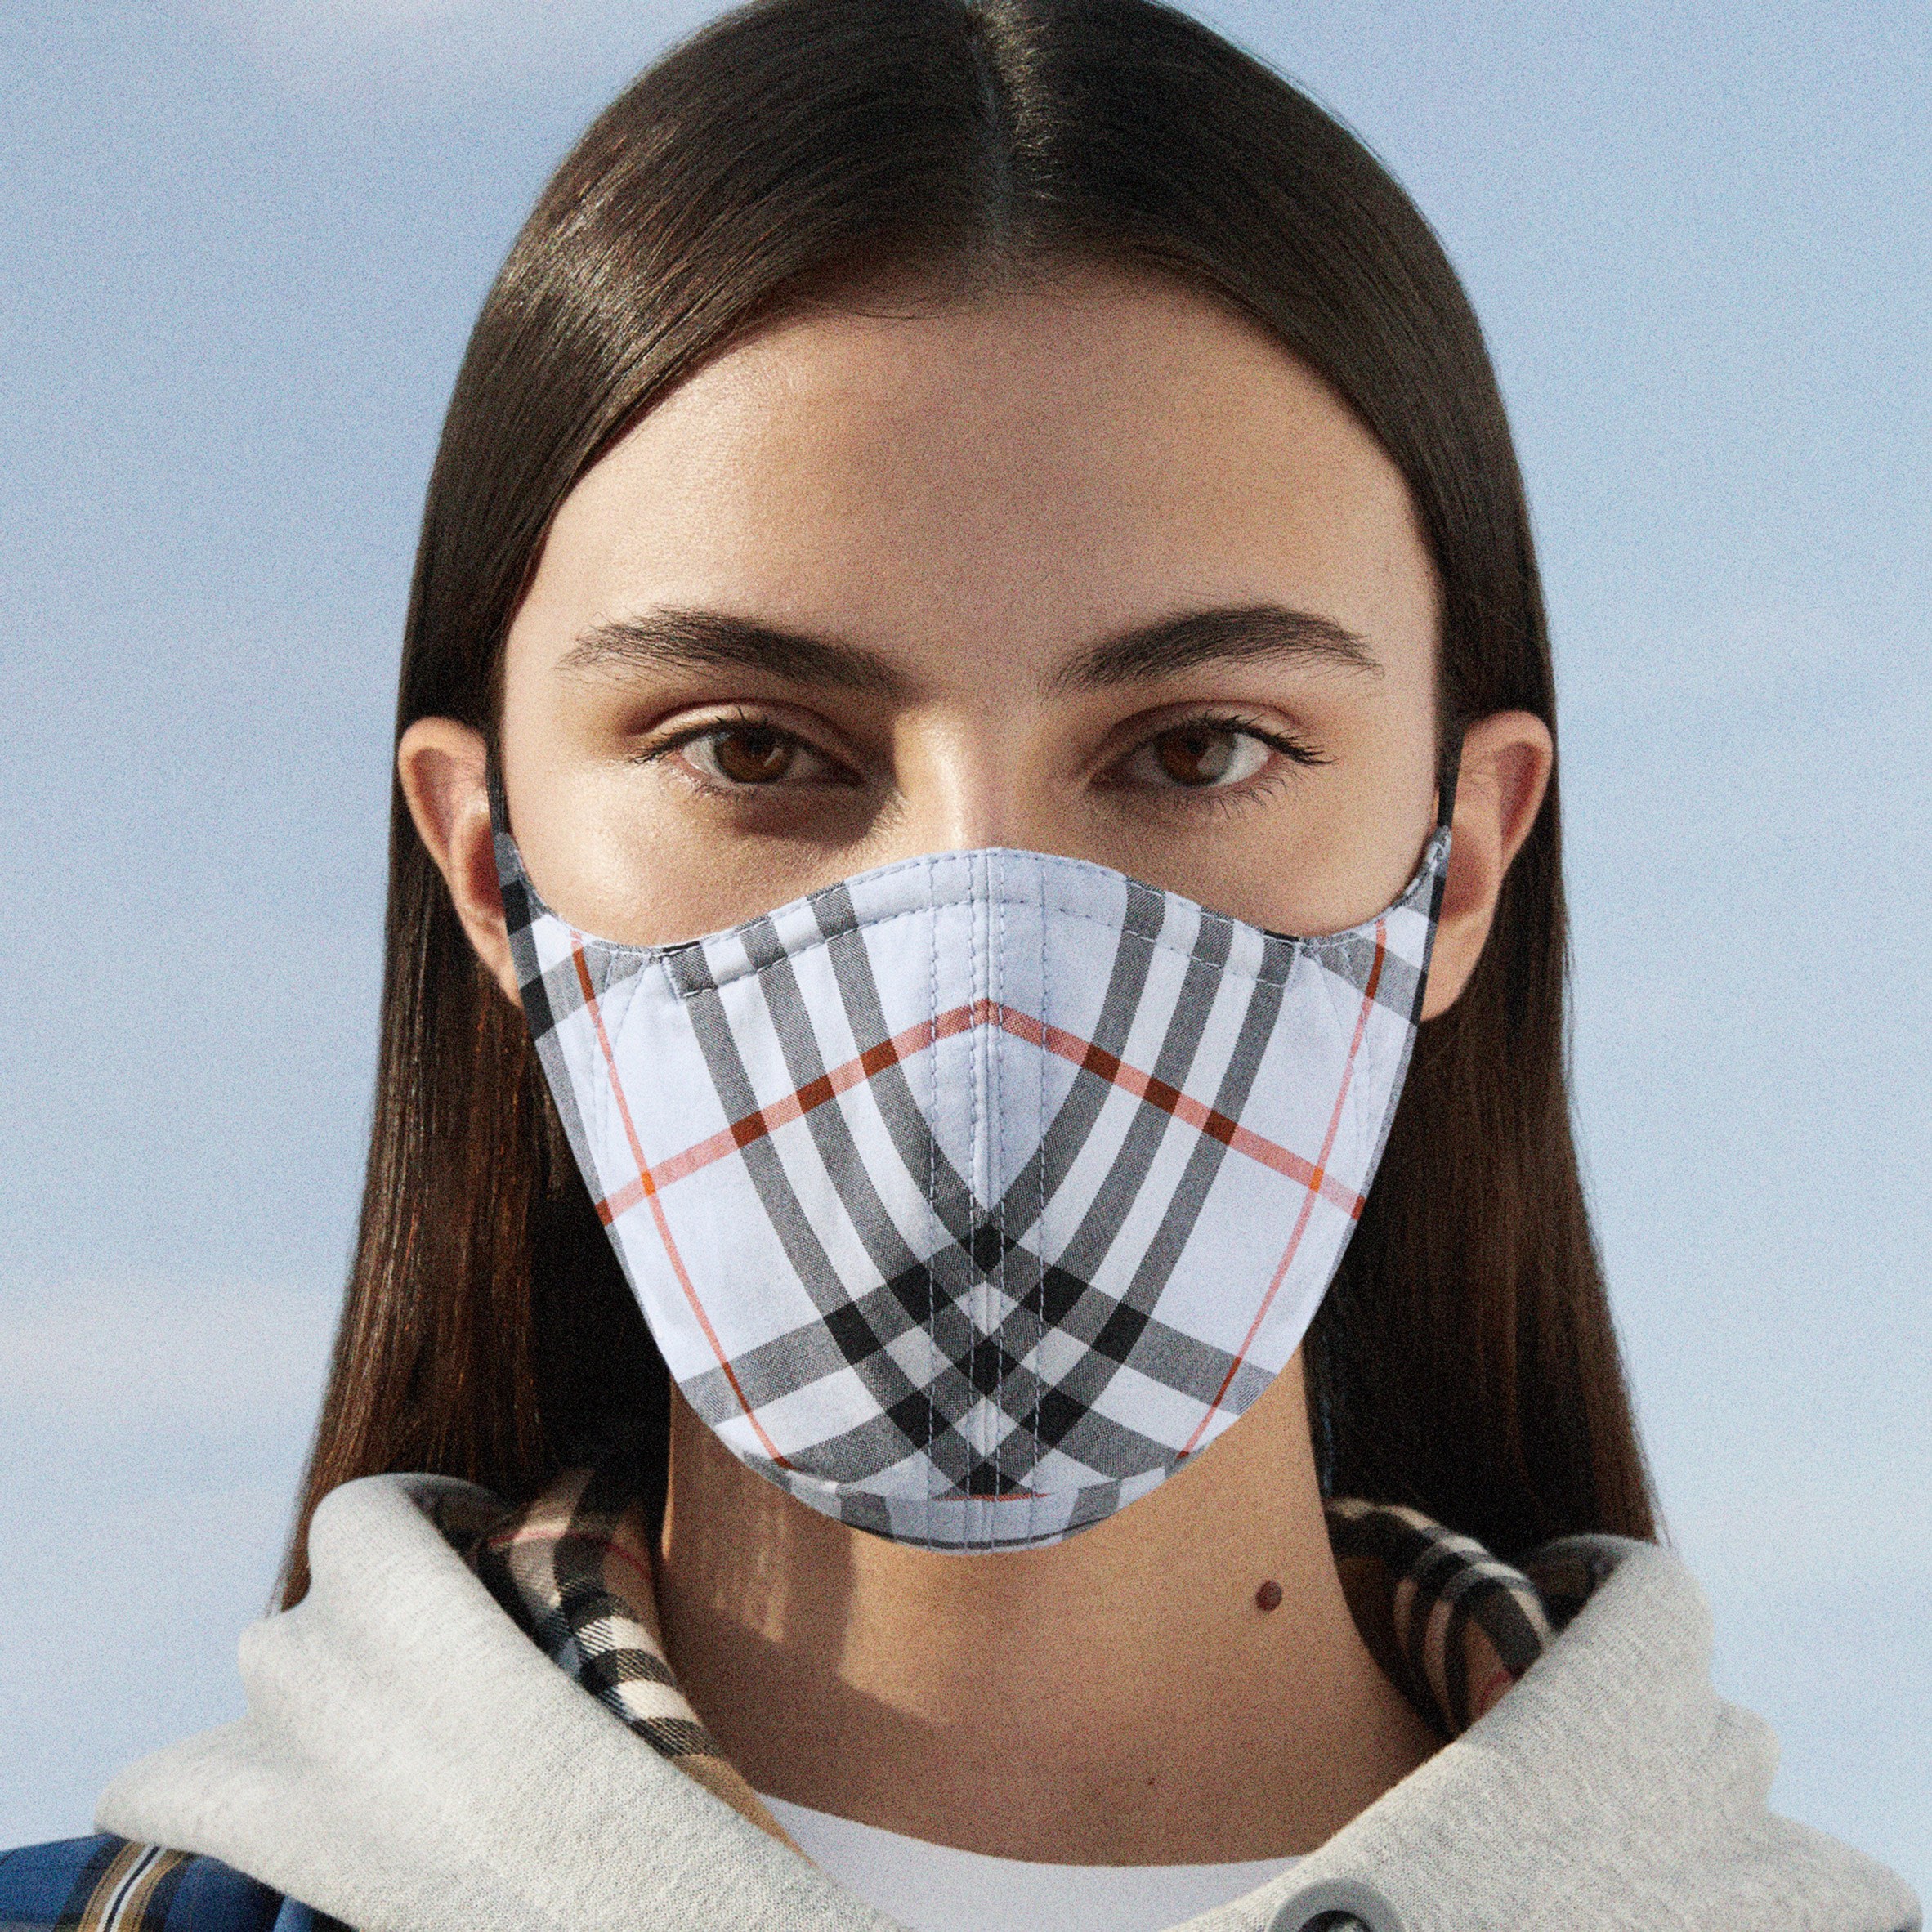 Burberry releases face mask with signature check on antimicrobial fabric